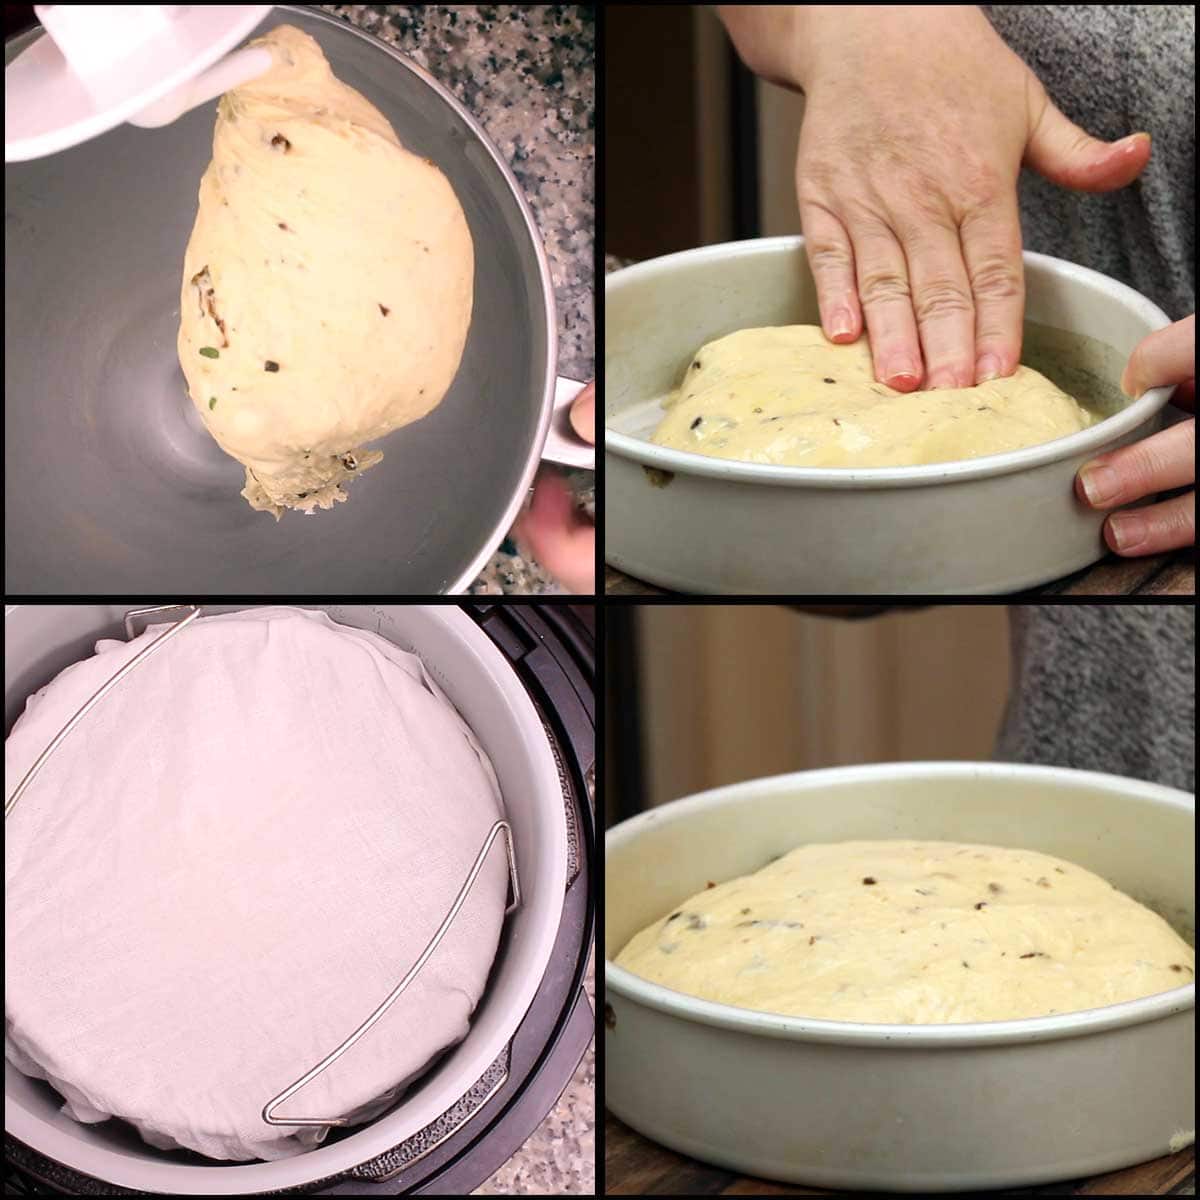 putting dough into pan, covering, and proofing in the Ninja Foodi